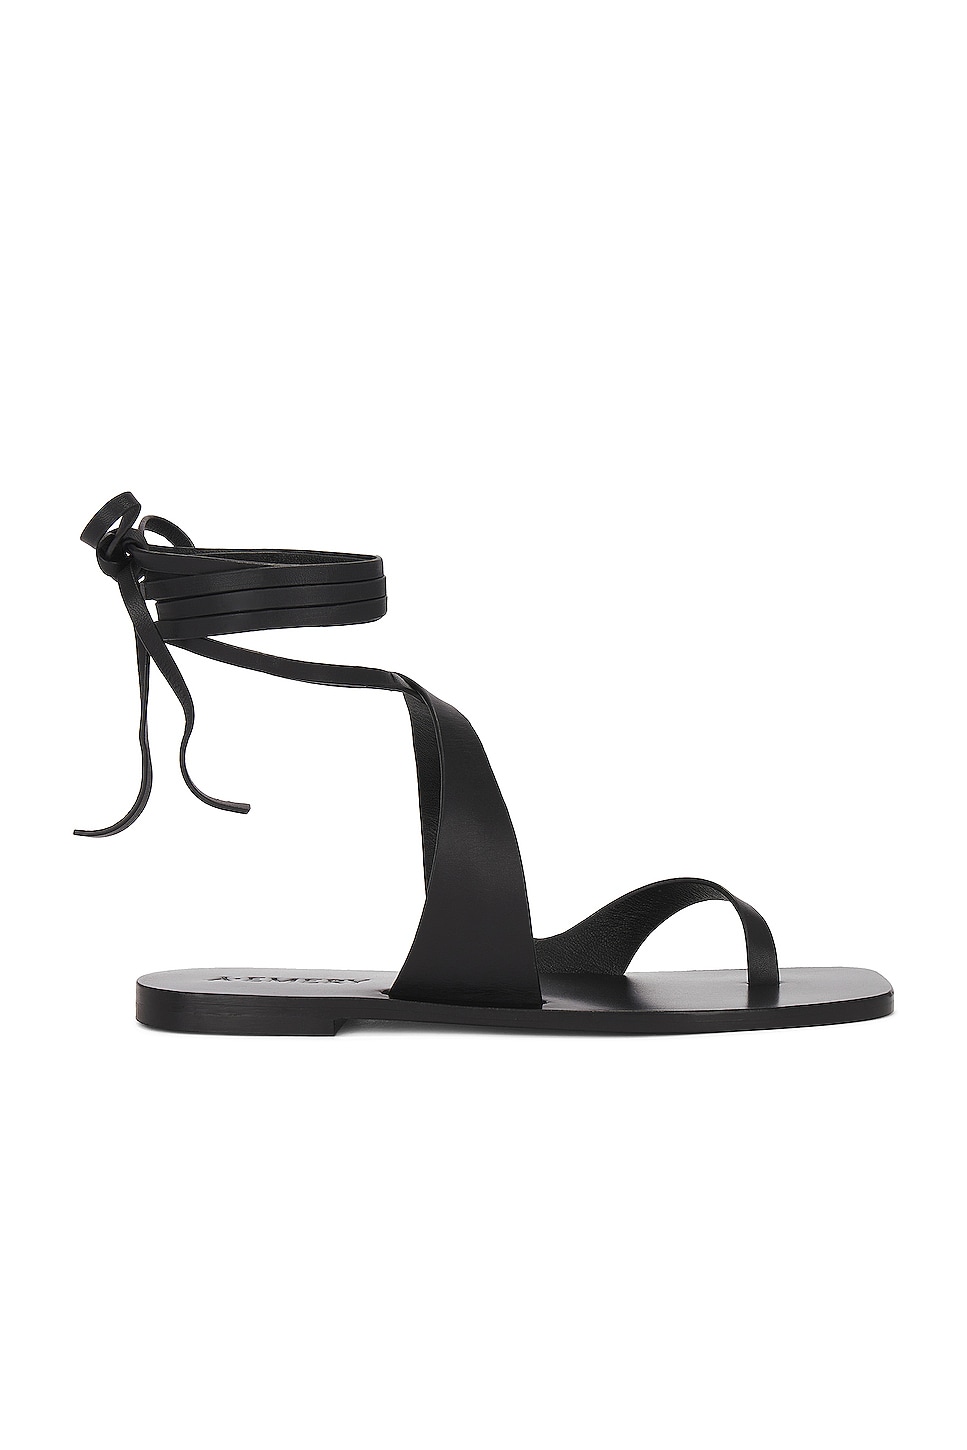 Image 1 of A.EMERY Marguax Sandal in Black